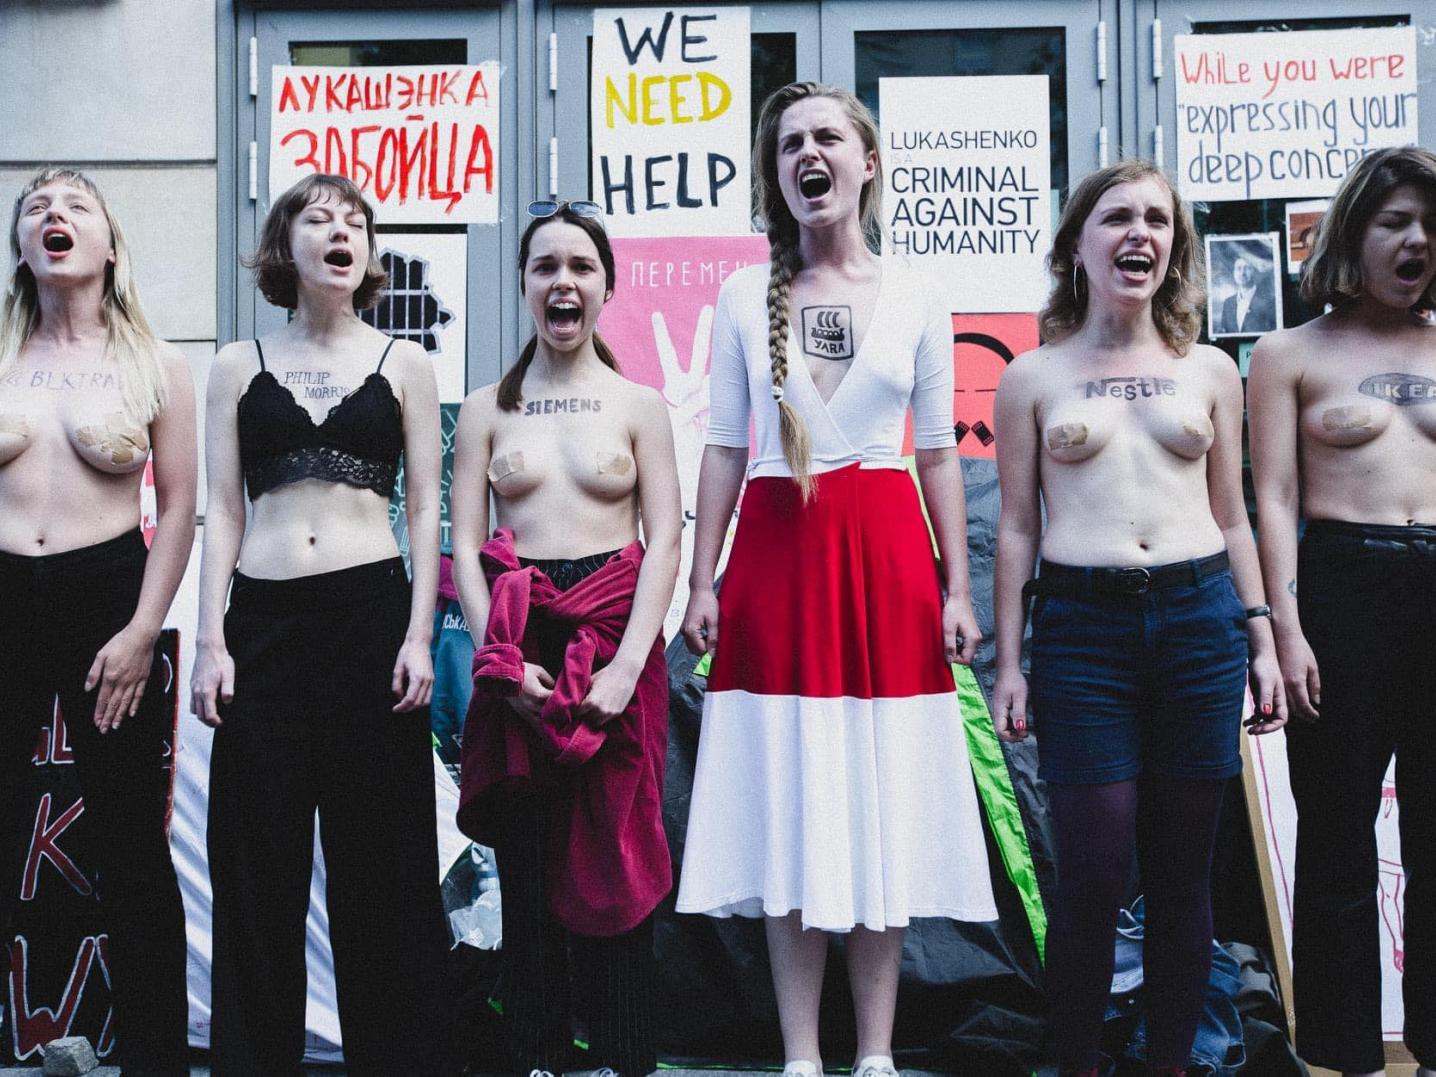 A Solidarity protest by Jana Shostak and other Belarusian women next to the seat of the European Commission representation in Warsaw, June 2021